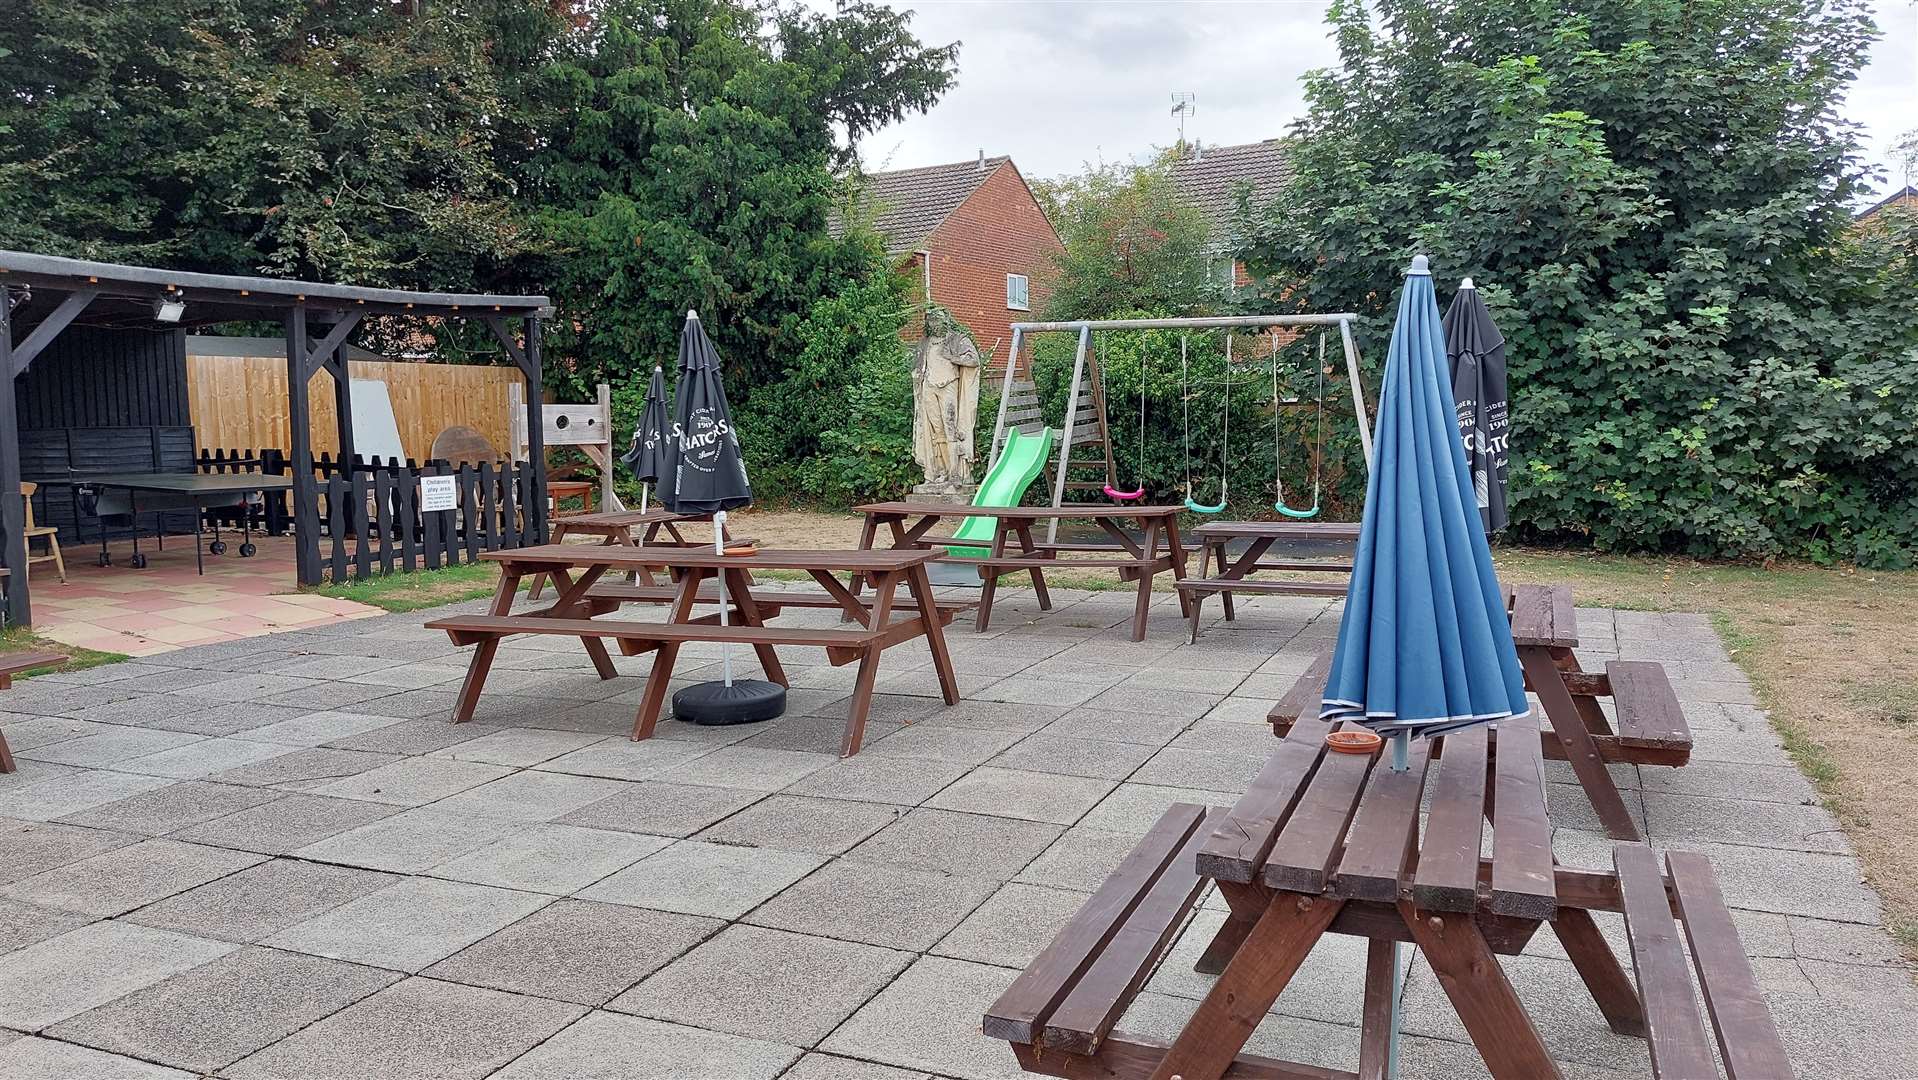 The pub's garden was popular with families